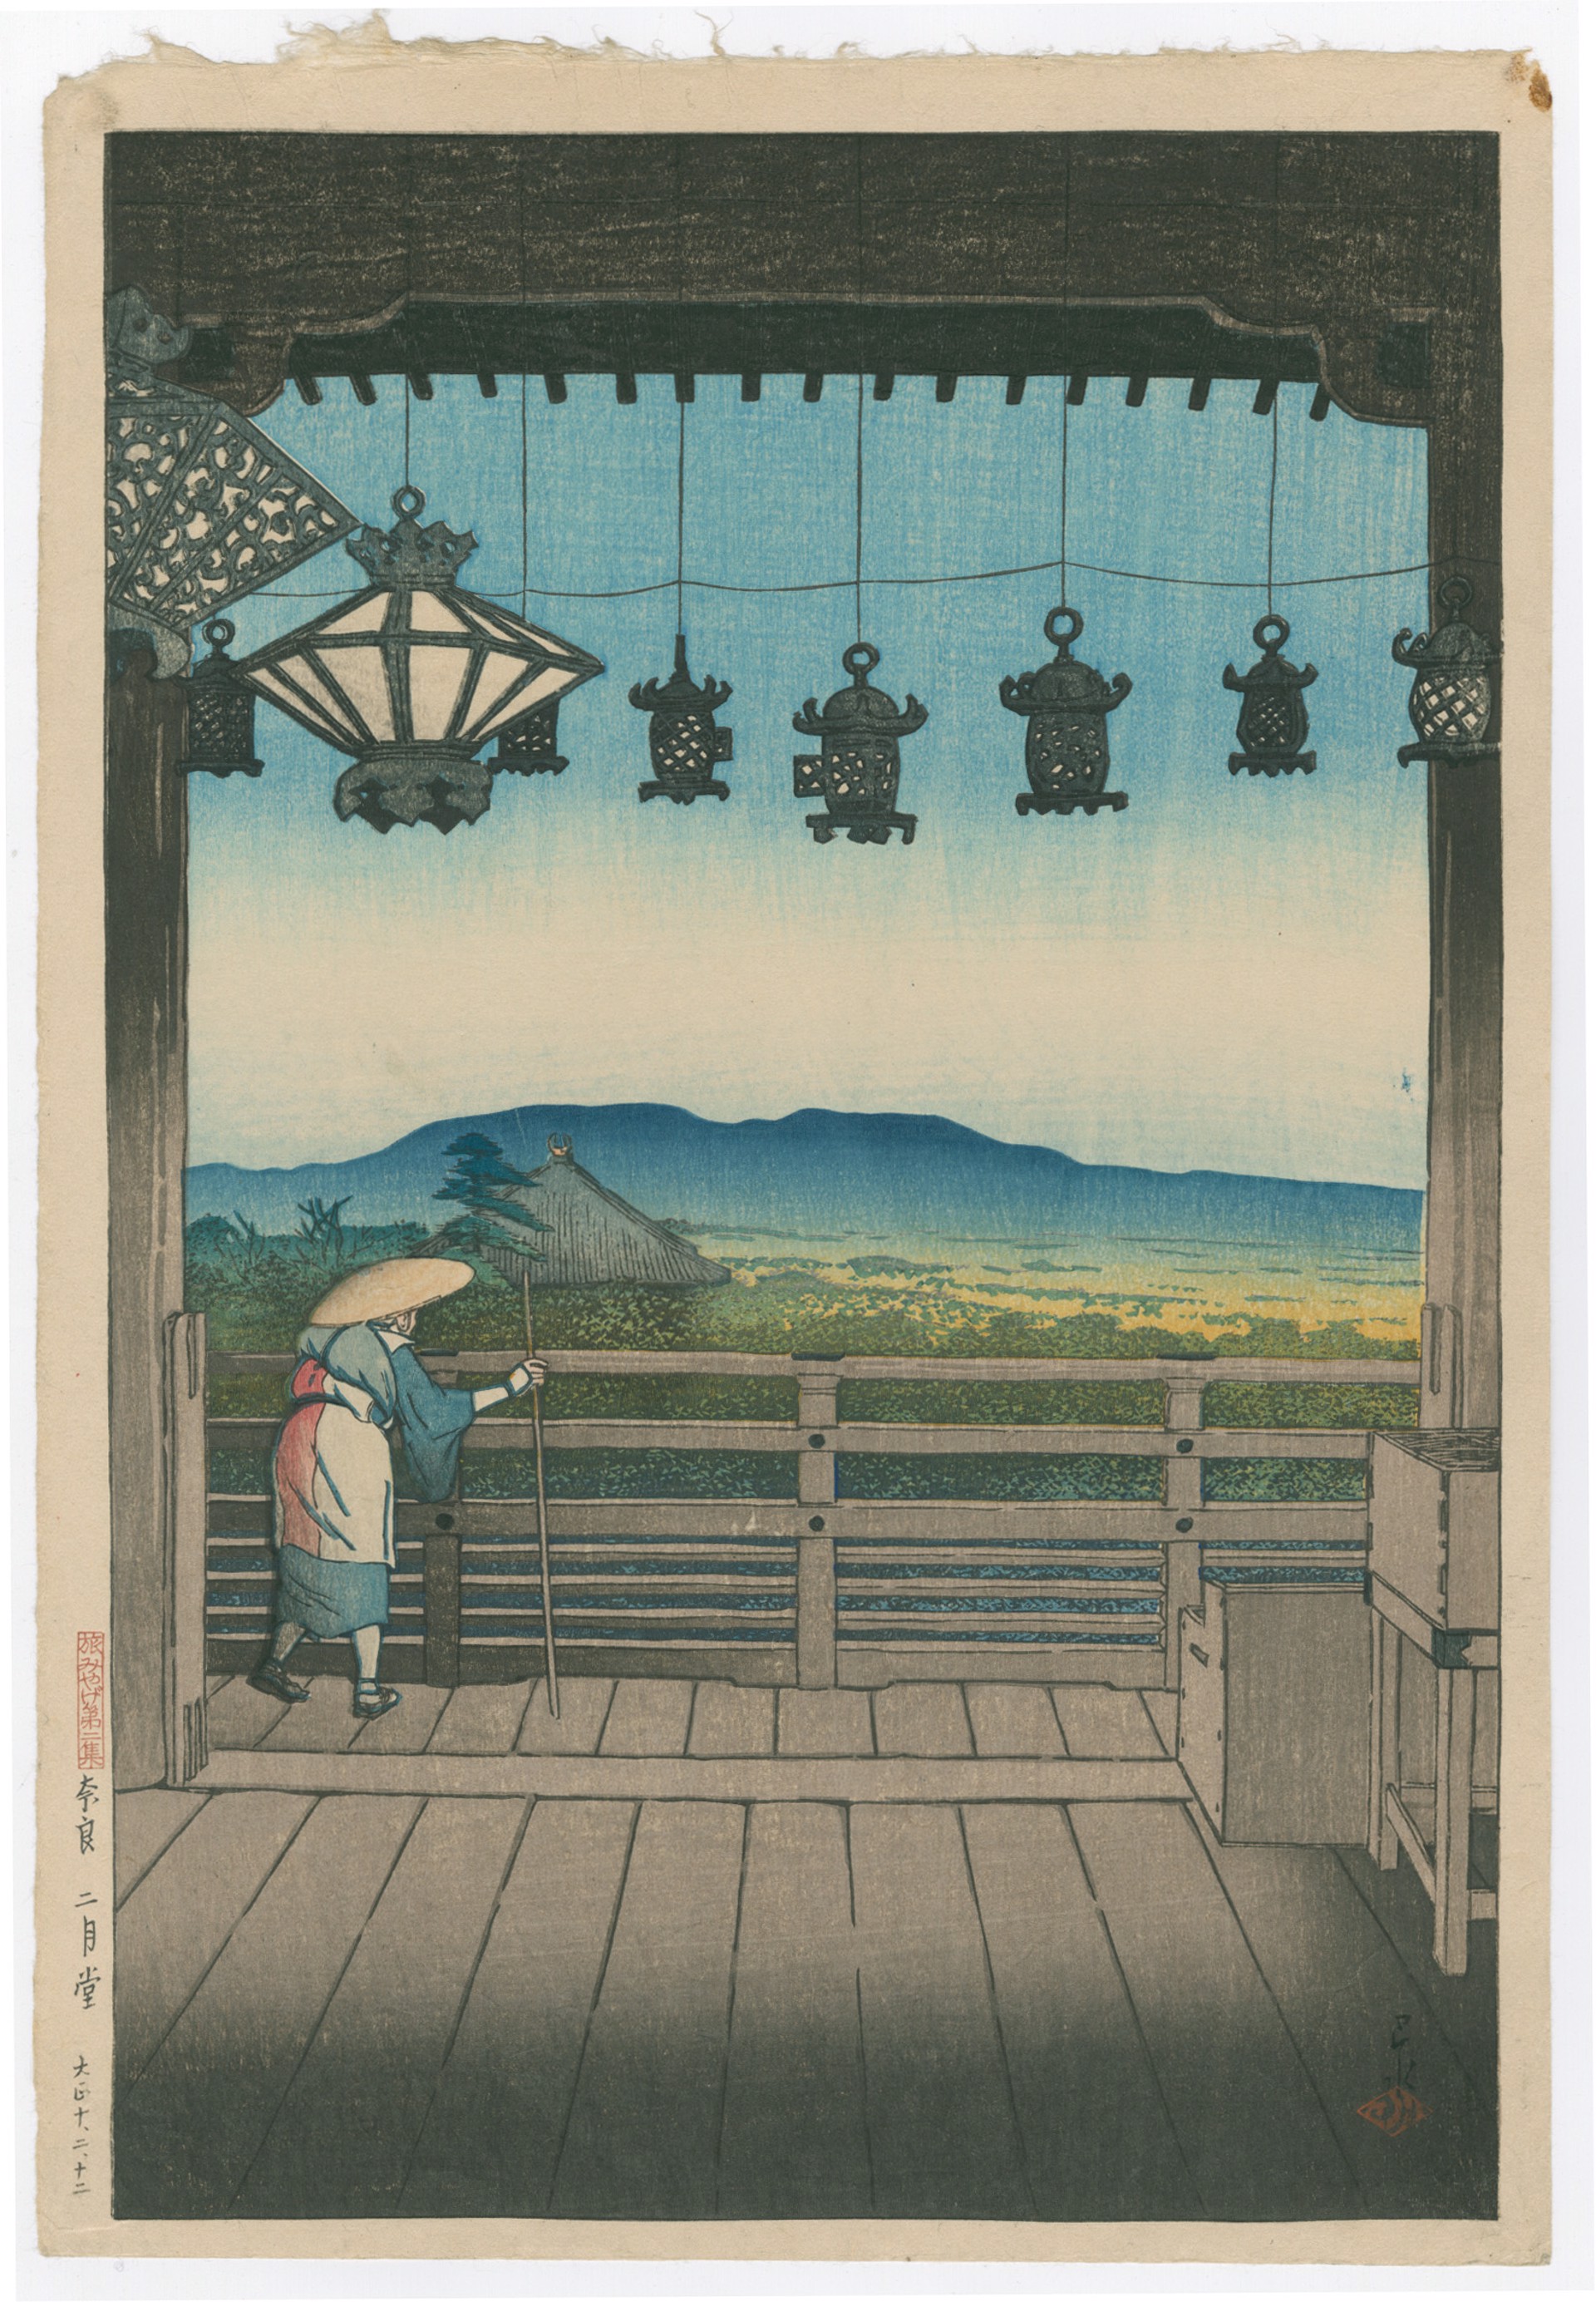 Nigatsudo Temple in Nara Souvenirs of Travel - 2rd series by Hasui